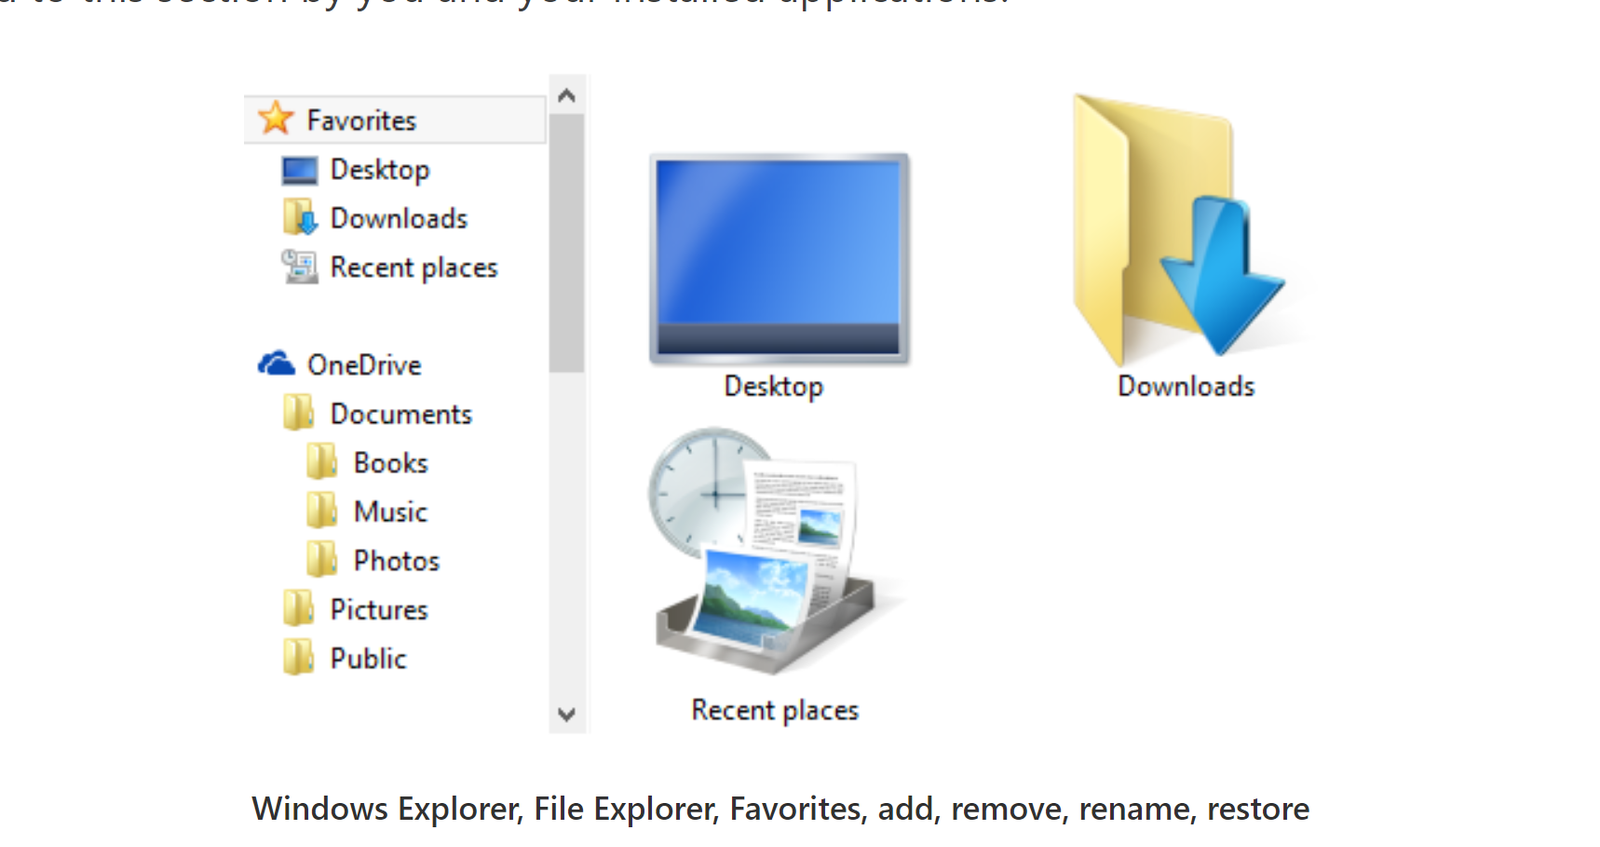 Where Is My Favorites List in File Explorer?